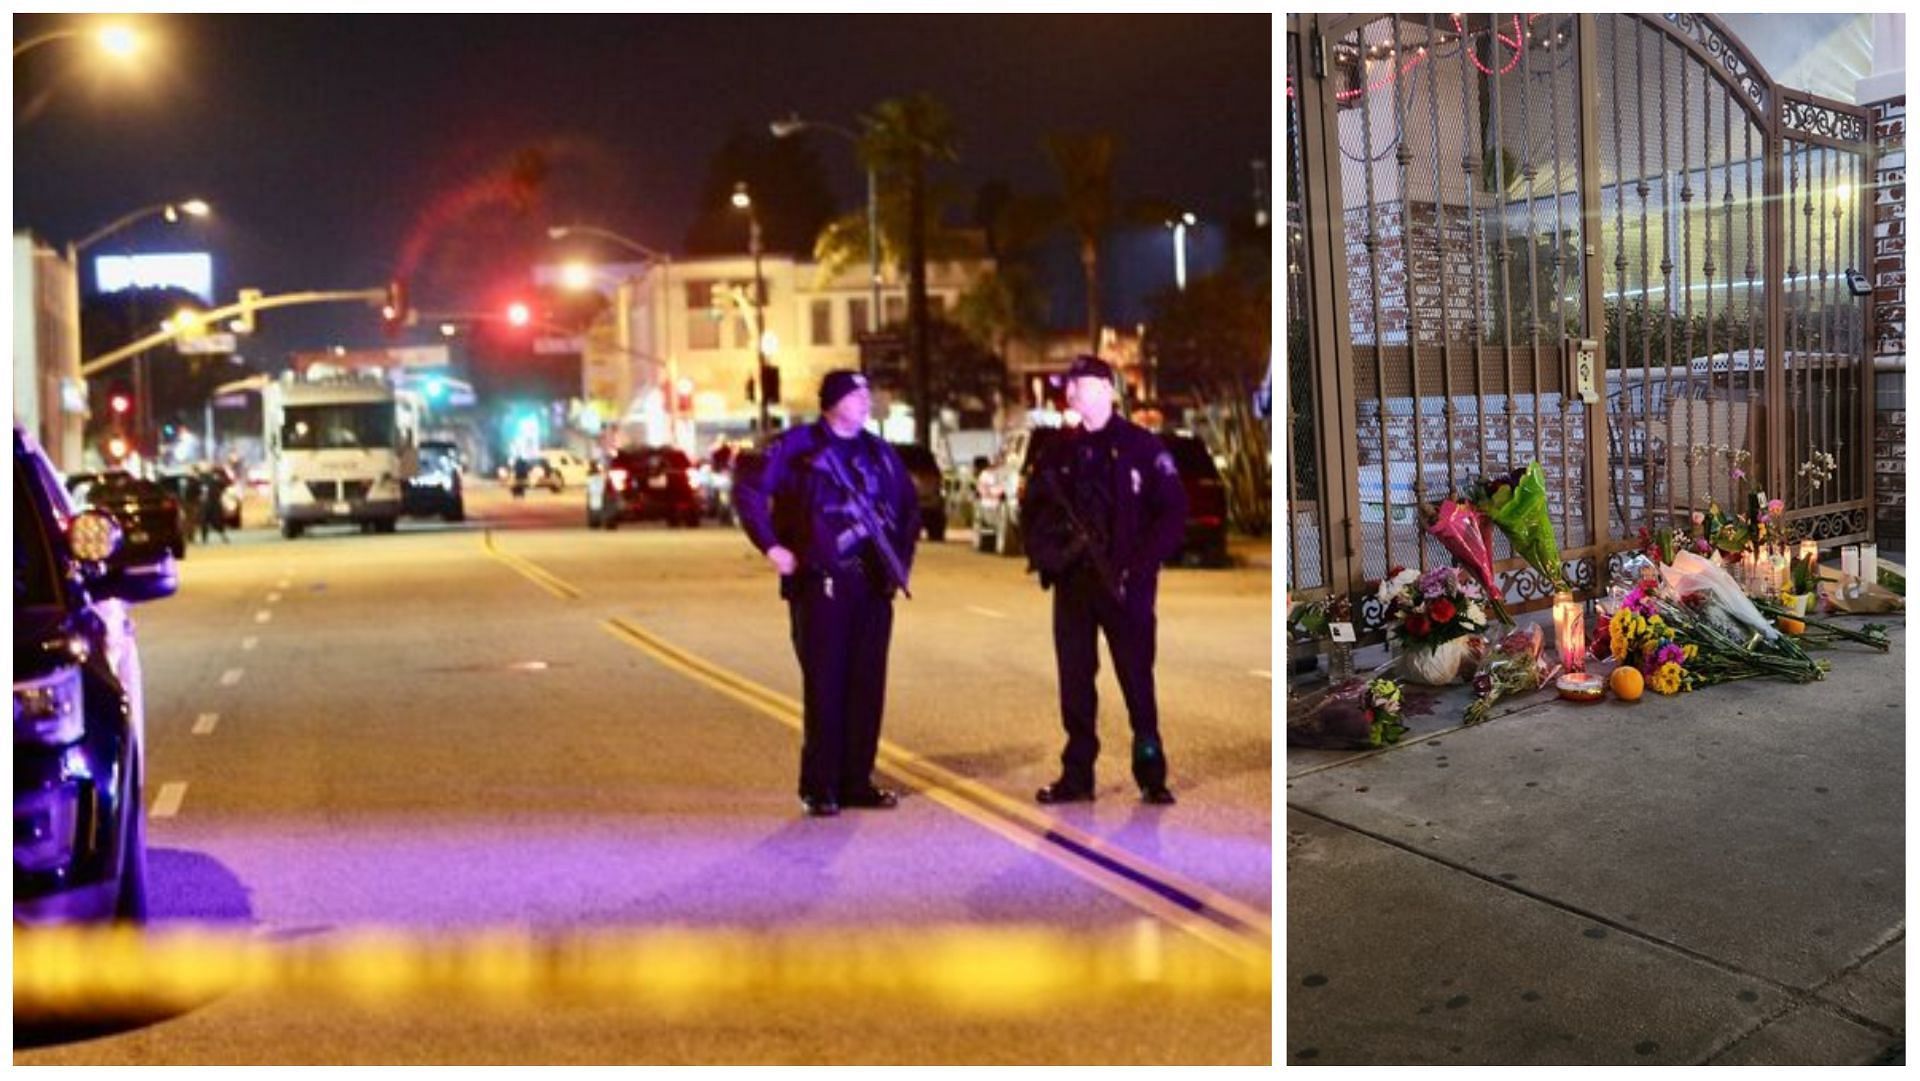 Officers are investigating the area of the shooting (left), candles and flowers have been offered in front of the dance studio at Monterey Park (right), (Images via @shannonrwatts and @BlakeTroliKFI/Twitter)